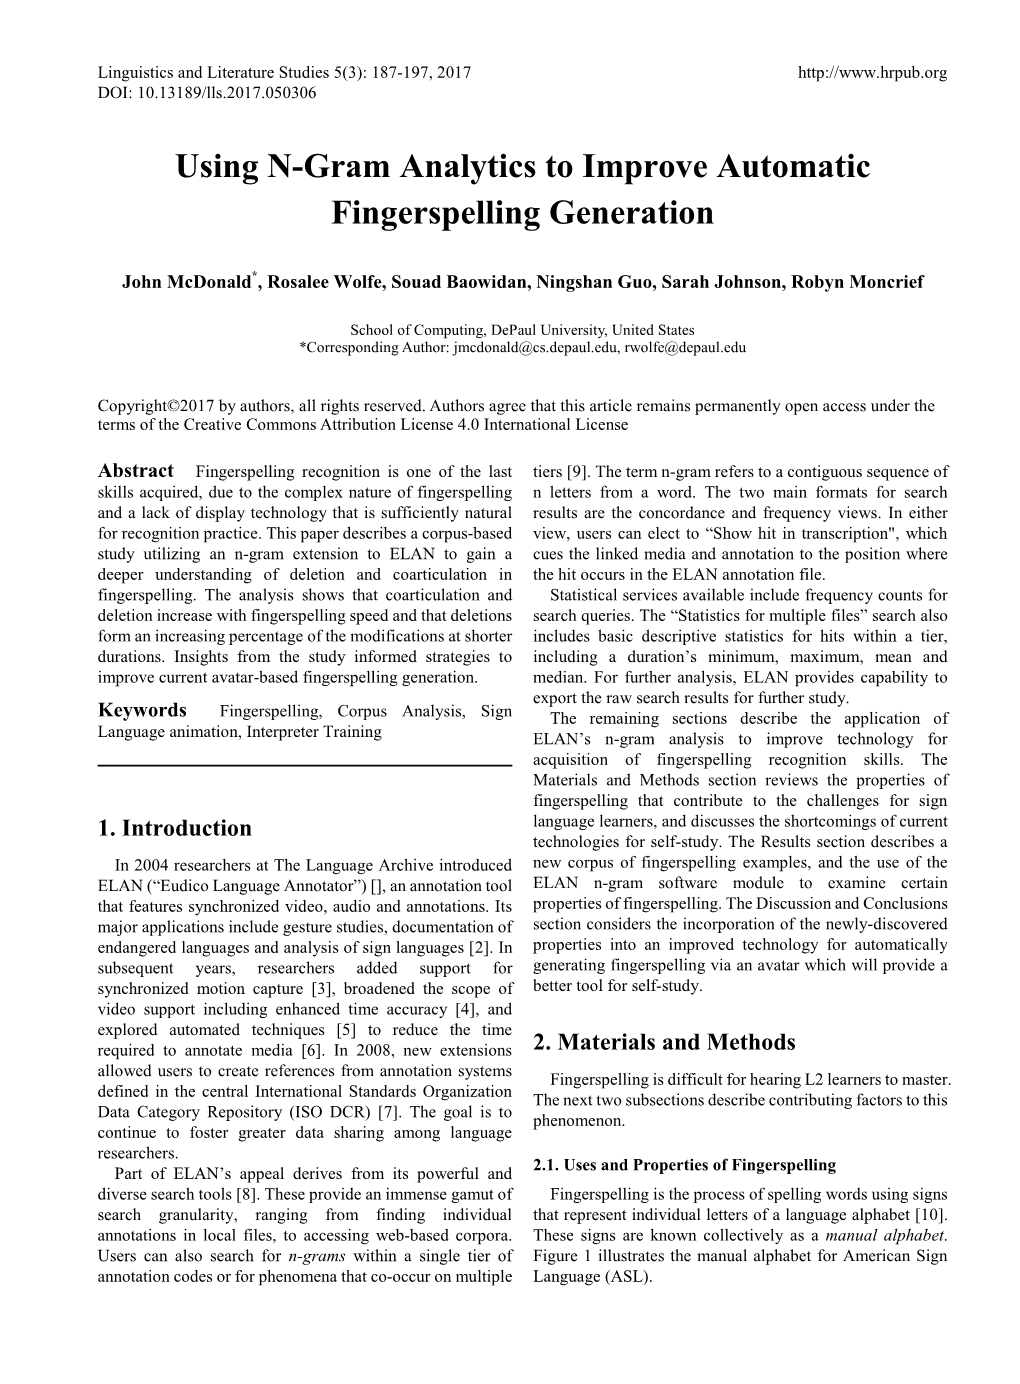 Using N-Gram Analytics to Improve Automatic Fingerspelling Generation